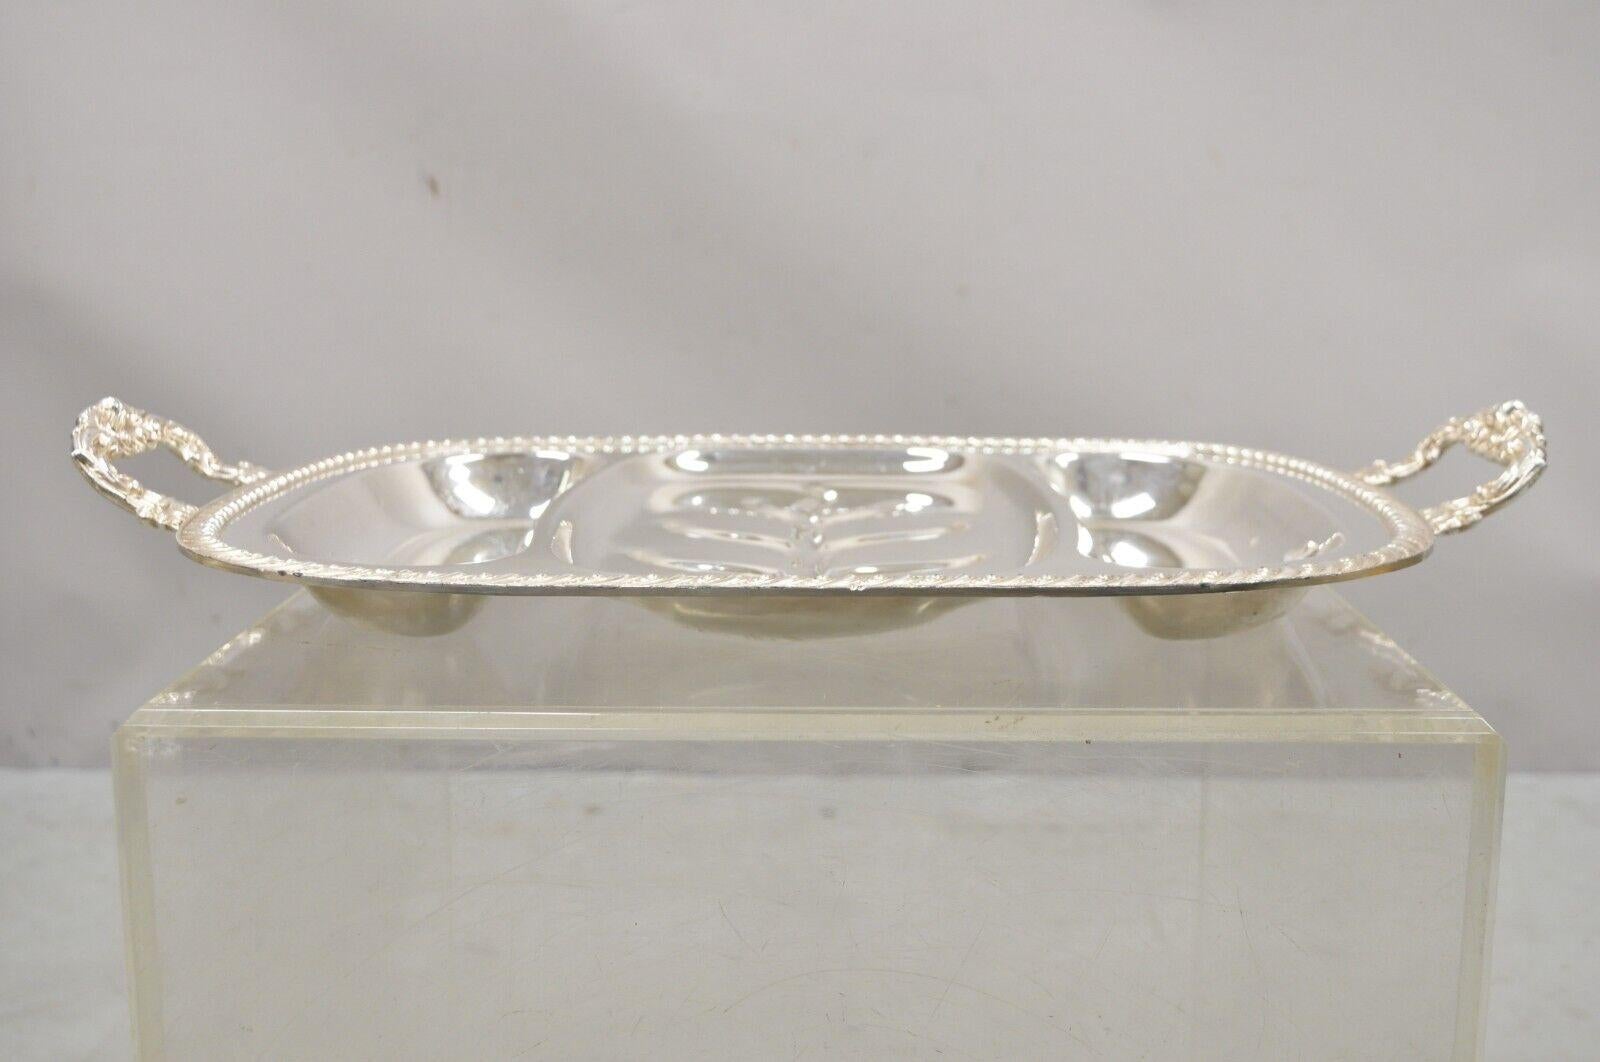 Antique JLS EPC silver plated Victorian cutlery meat tray serving platter. Item features cutlery sections, ornate twin handles, original stamp, very nice antique item, quality craftsmanship, great style and form. Circa early to mid 20th century.